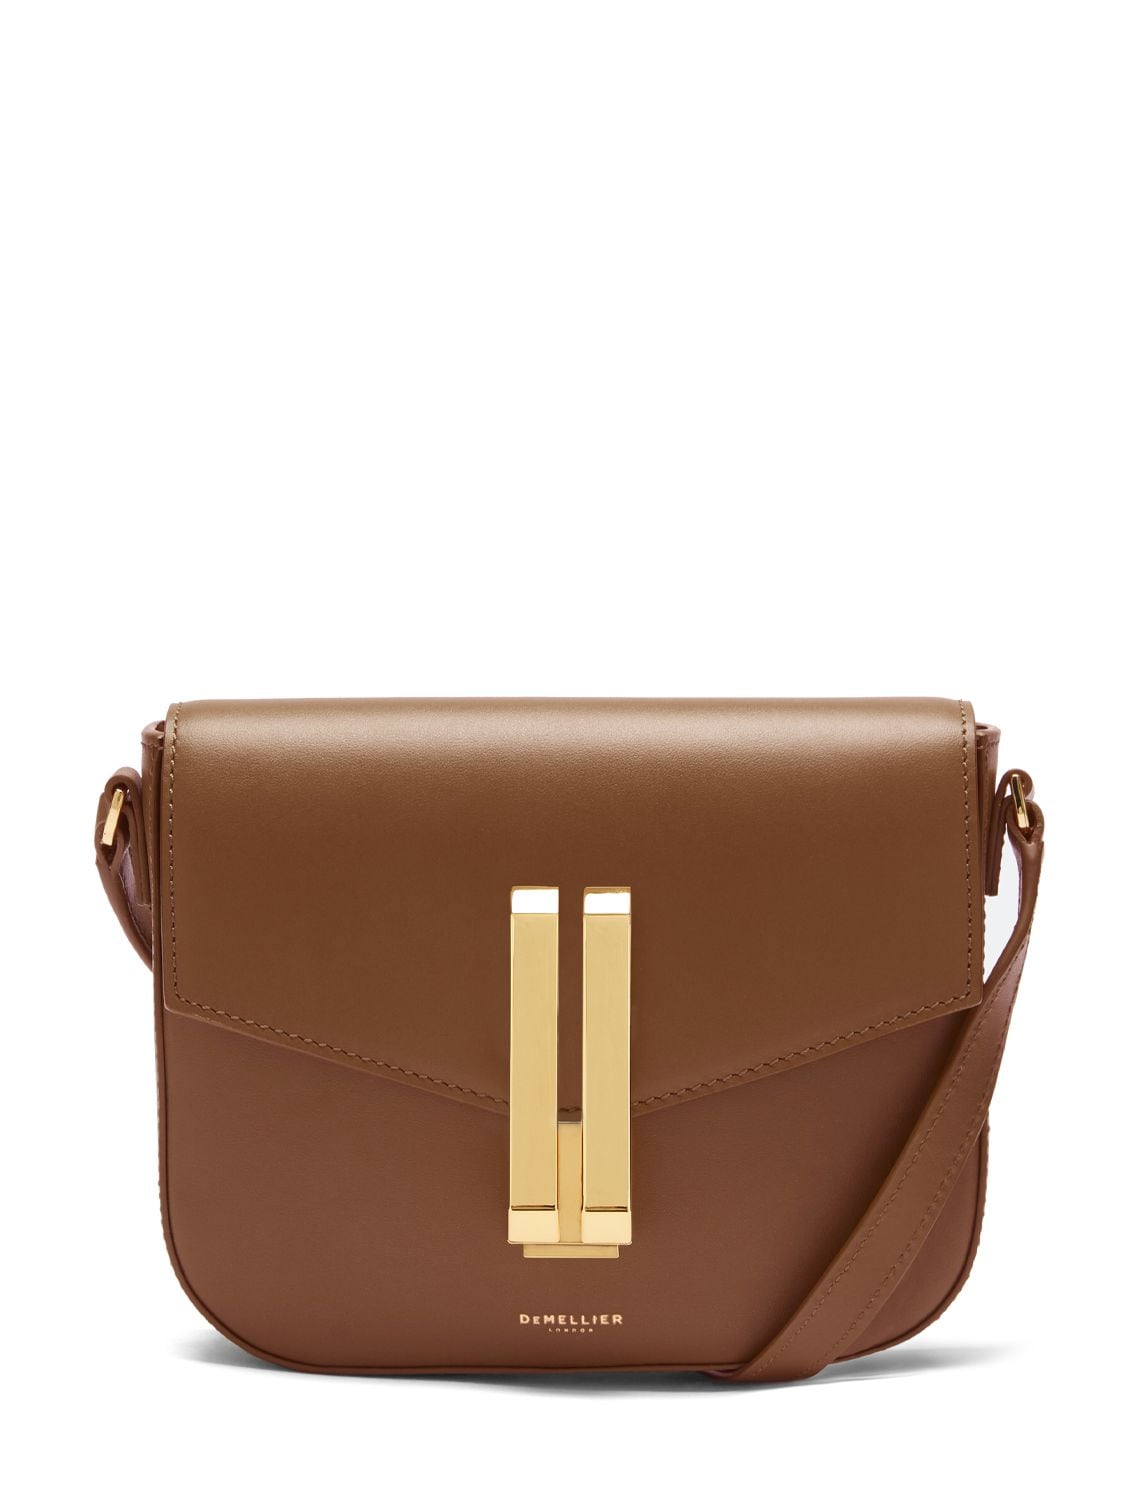 Demellier Small Vancouver Smooth Leather Bag In Tan/ecru Stitching/gold